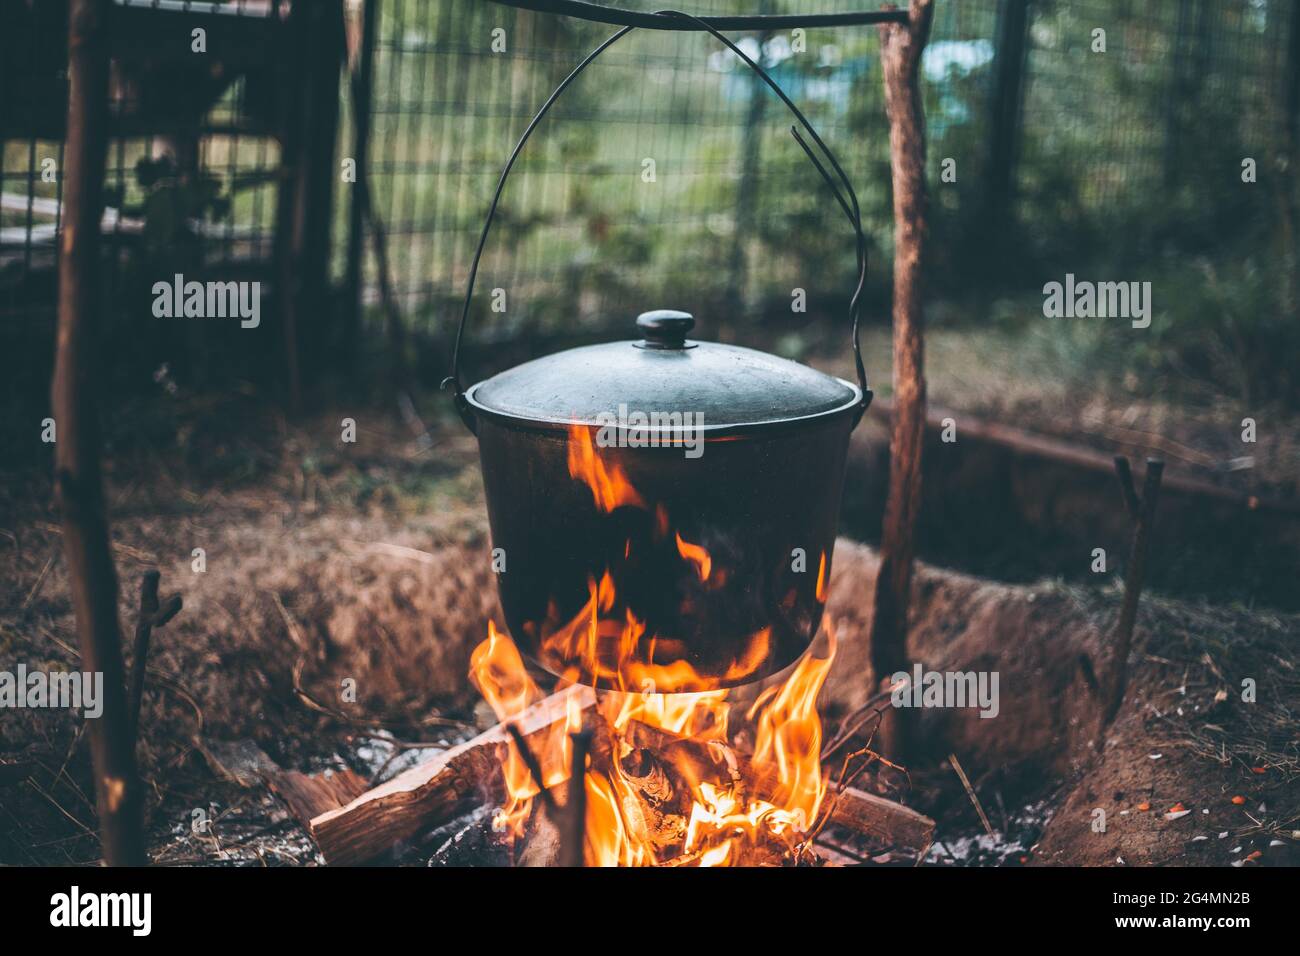 https://c8.alamy.com/comp/2G4MN2B/cauldron-with-soup-on-a-campfire-in-a-hike-2G4MN2B.jpg